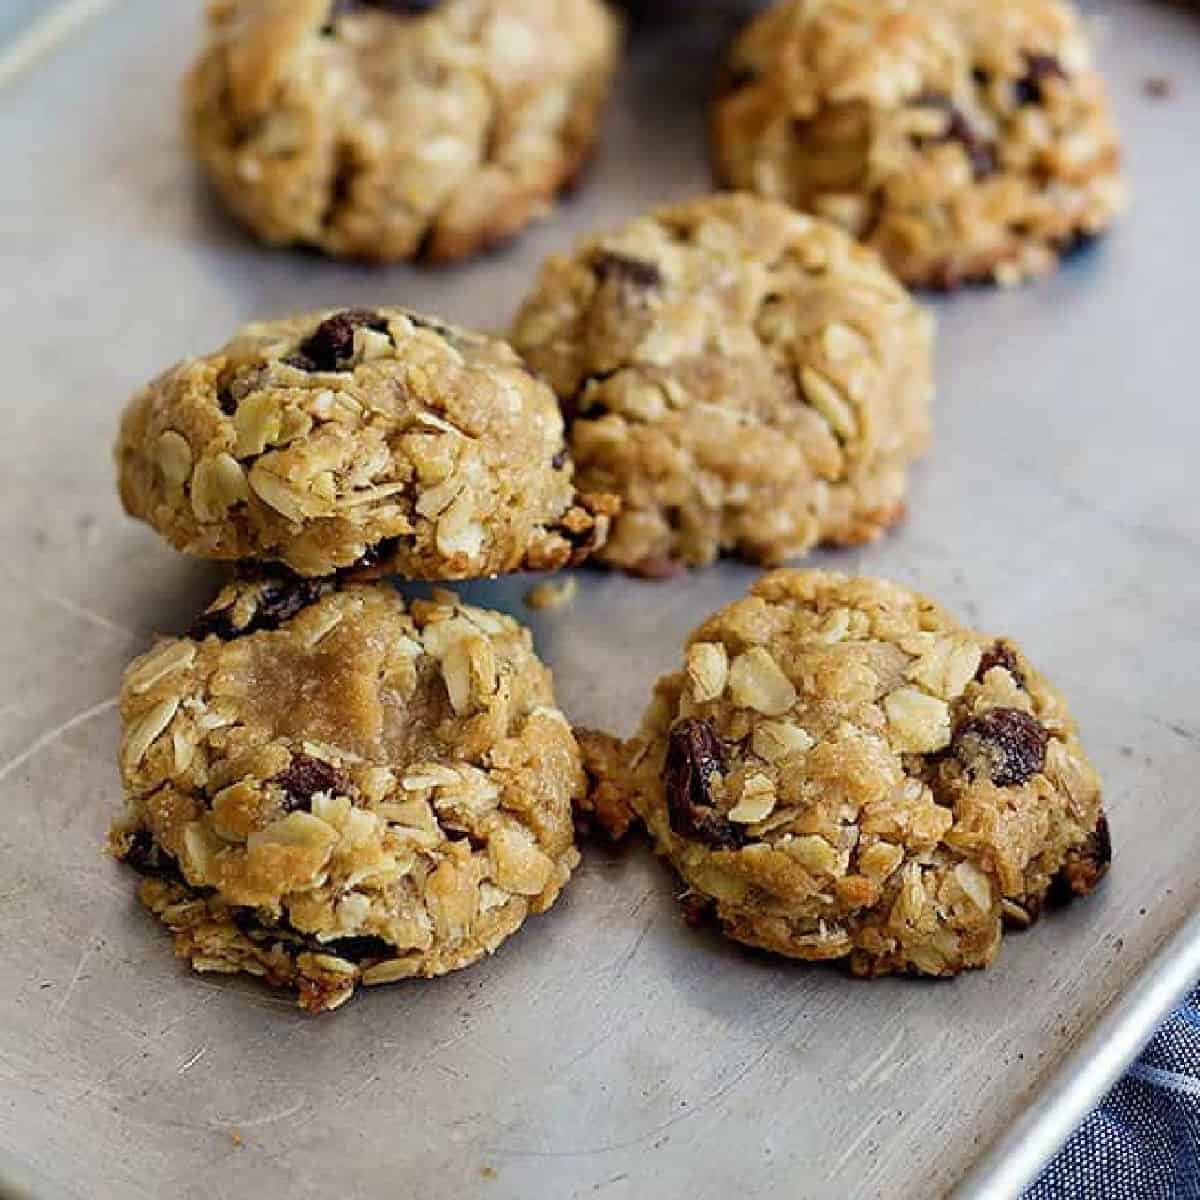 Peanut butter oatmeal raisin cookies, a twist on a classic. These cookies are so easy to make and are packed with a lot of flavor. The combination of peanut butter and oatmeal is amazing!
